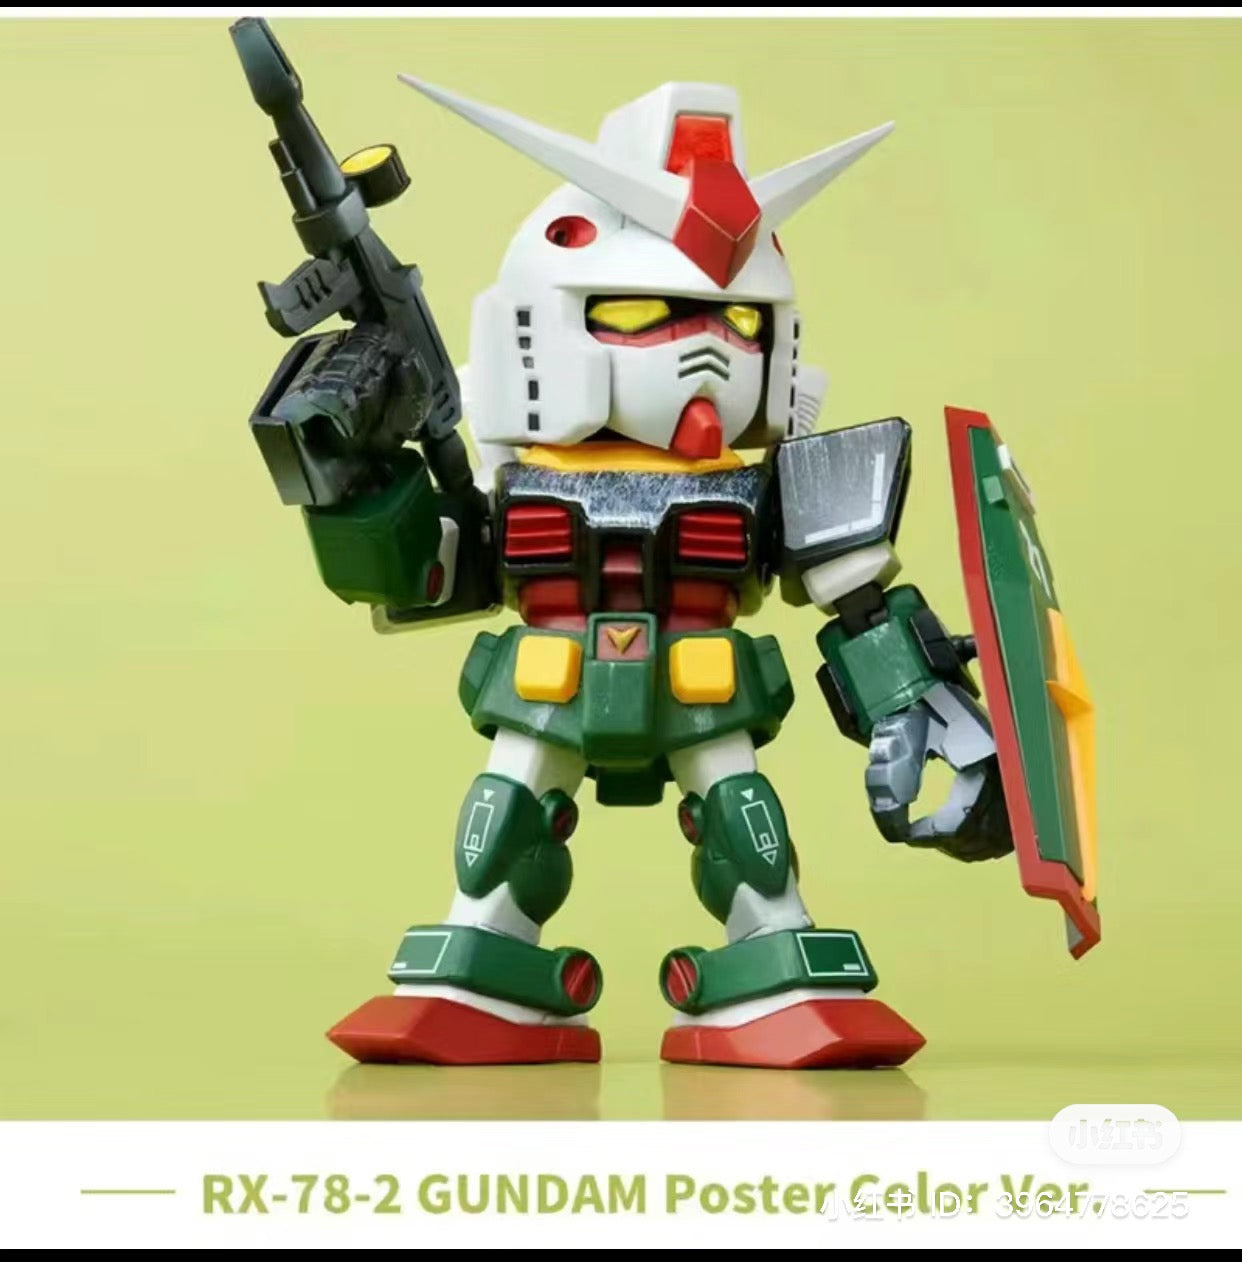 A blind box series featuring QMSV-MINI GUNDAM 2.0 toy robot action figures. Preorder for June 2024. Includes 6 regular designs and 2 secrets. Purchase a case for 8 regular or 7 with 1 secret.